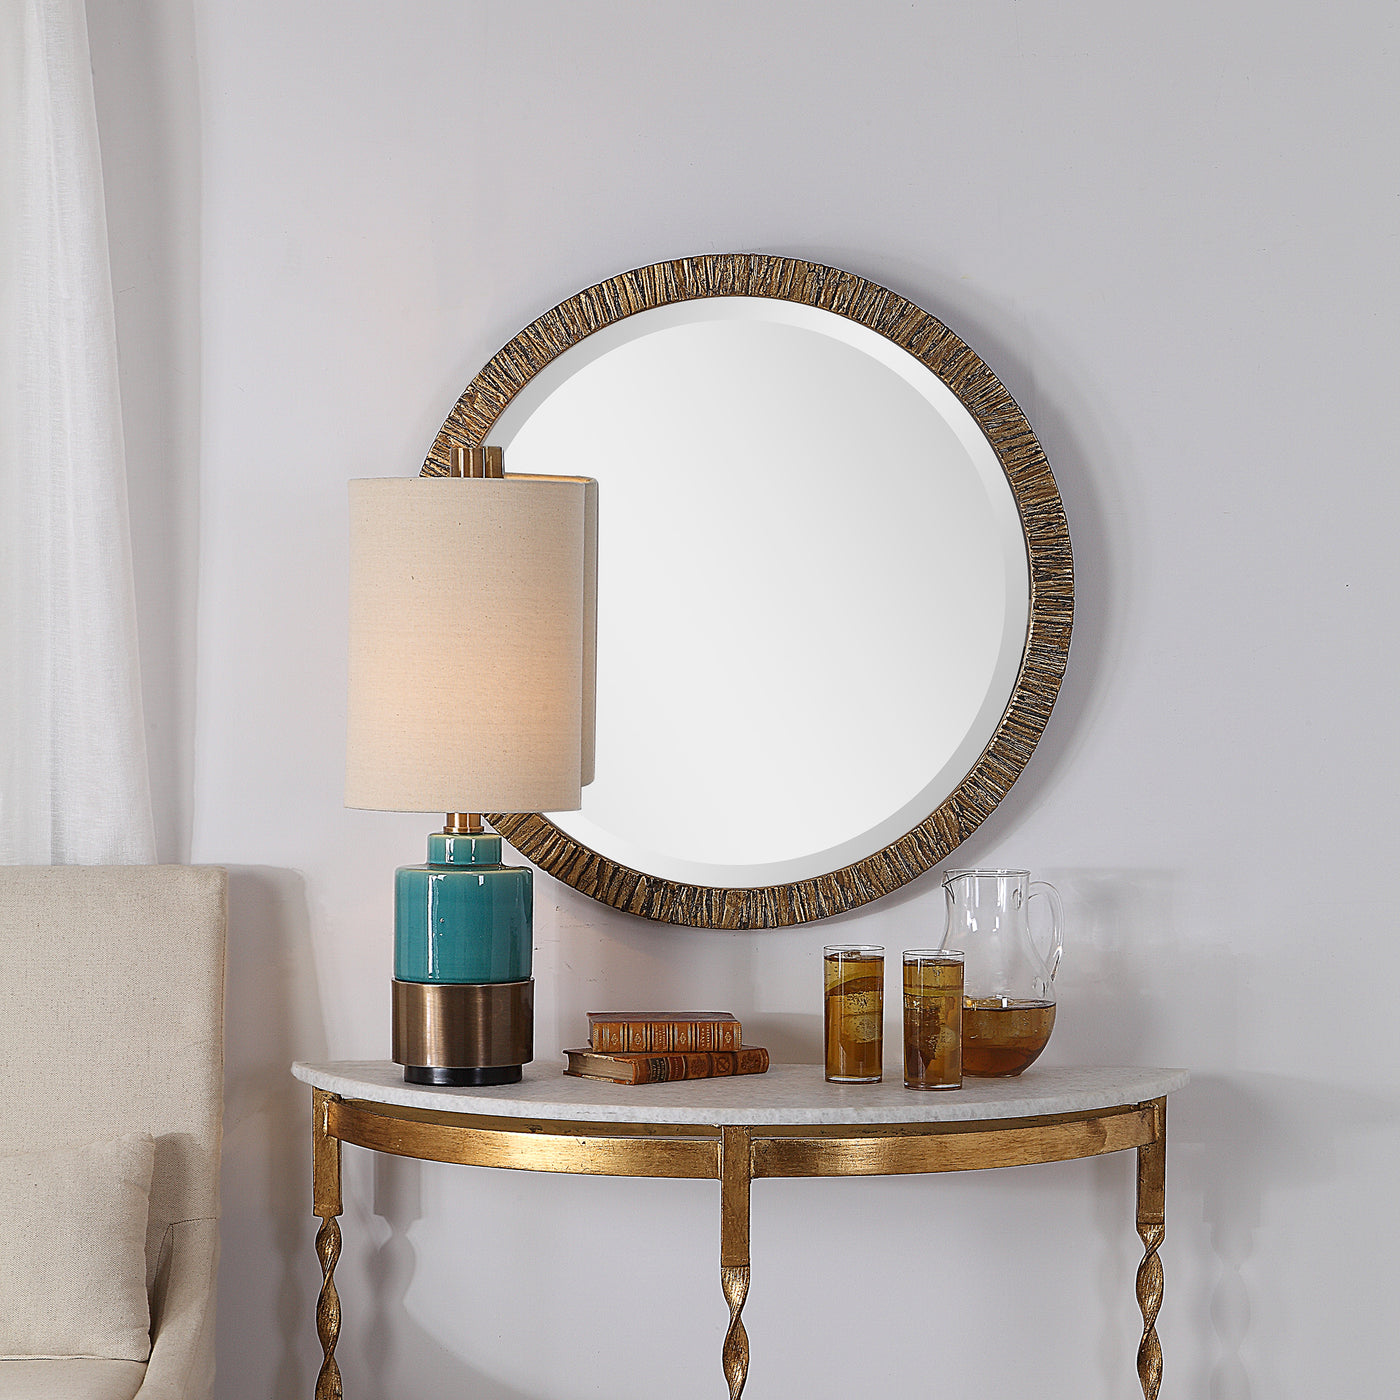 This Classic Round Mirror Showcases A Modern Style That Is Easy To Place In Any Design. The Solid Wood Frame Is Covered In...